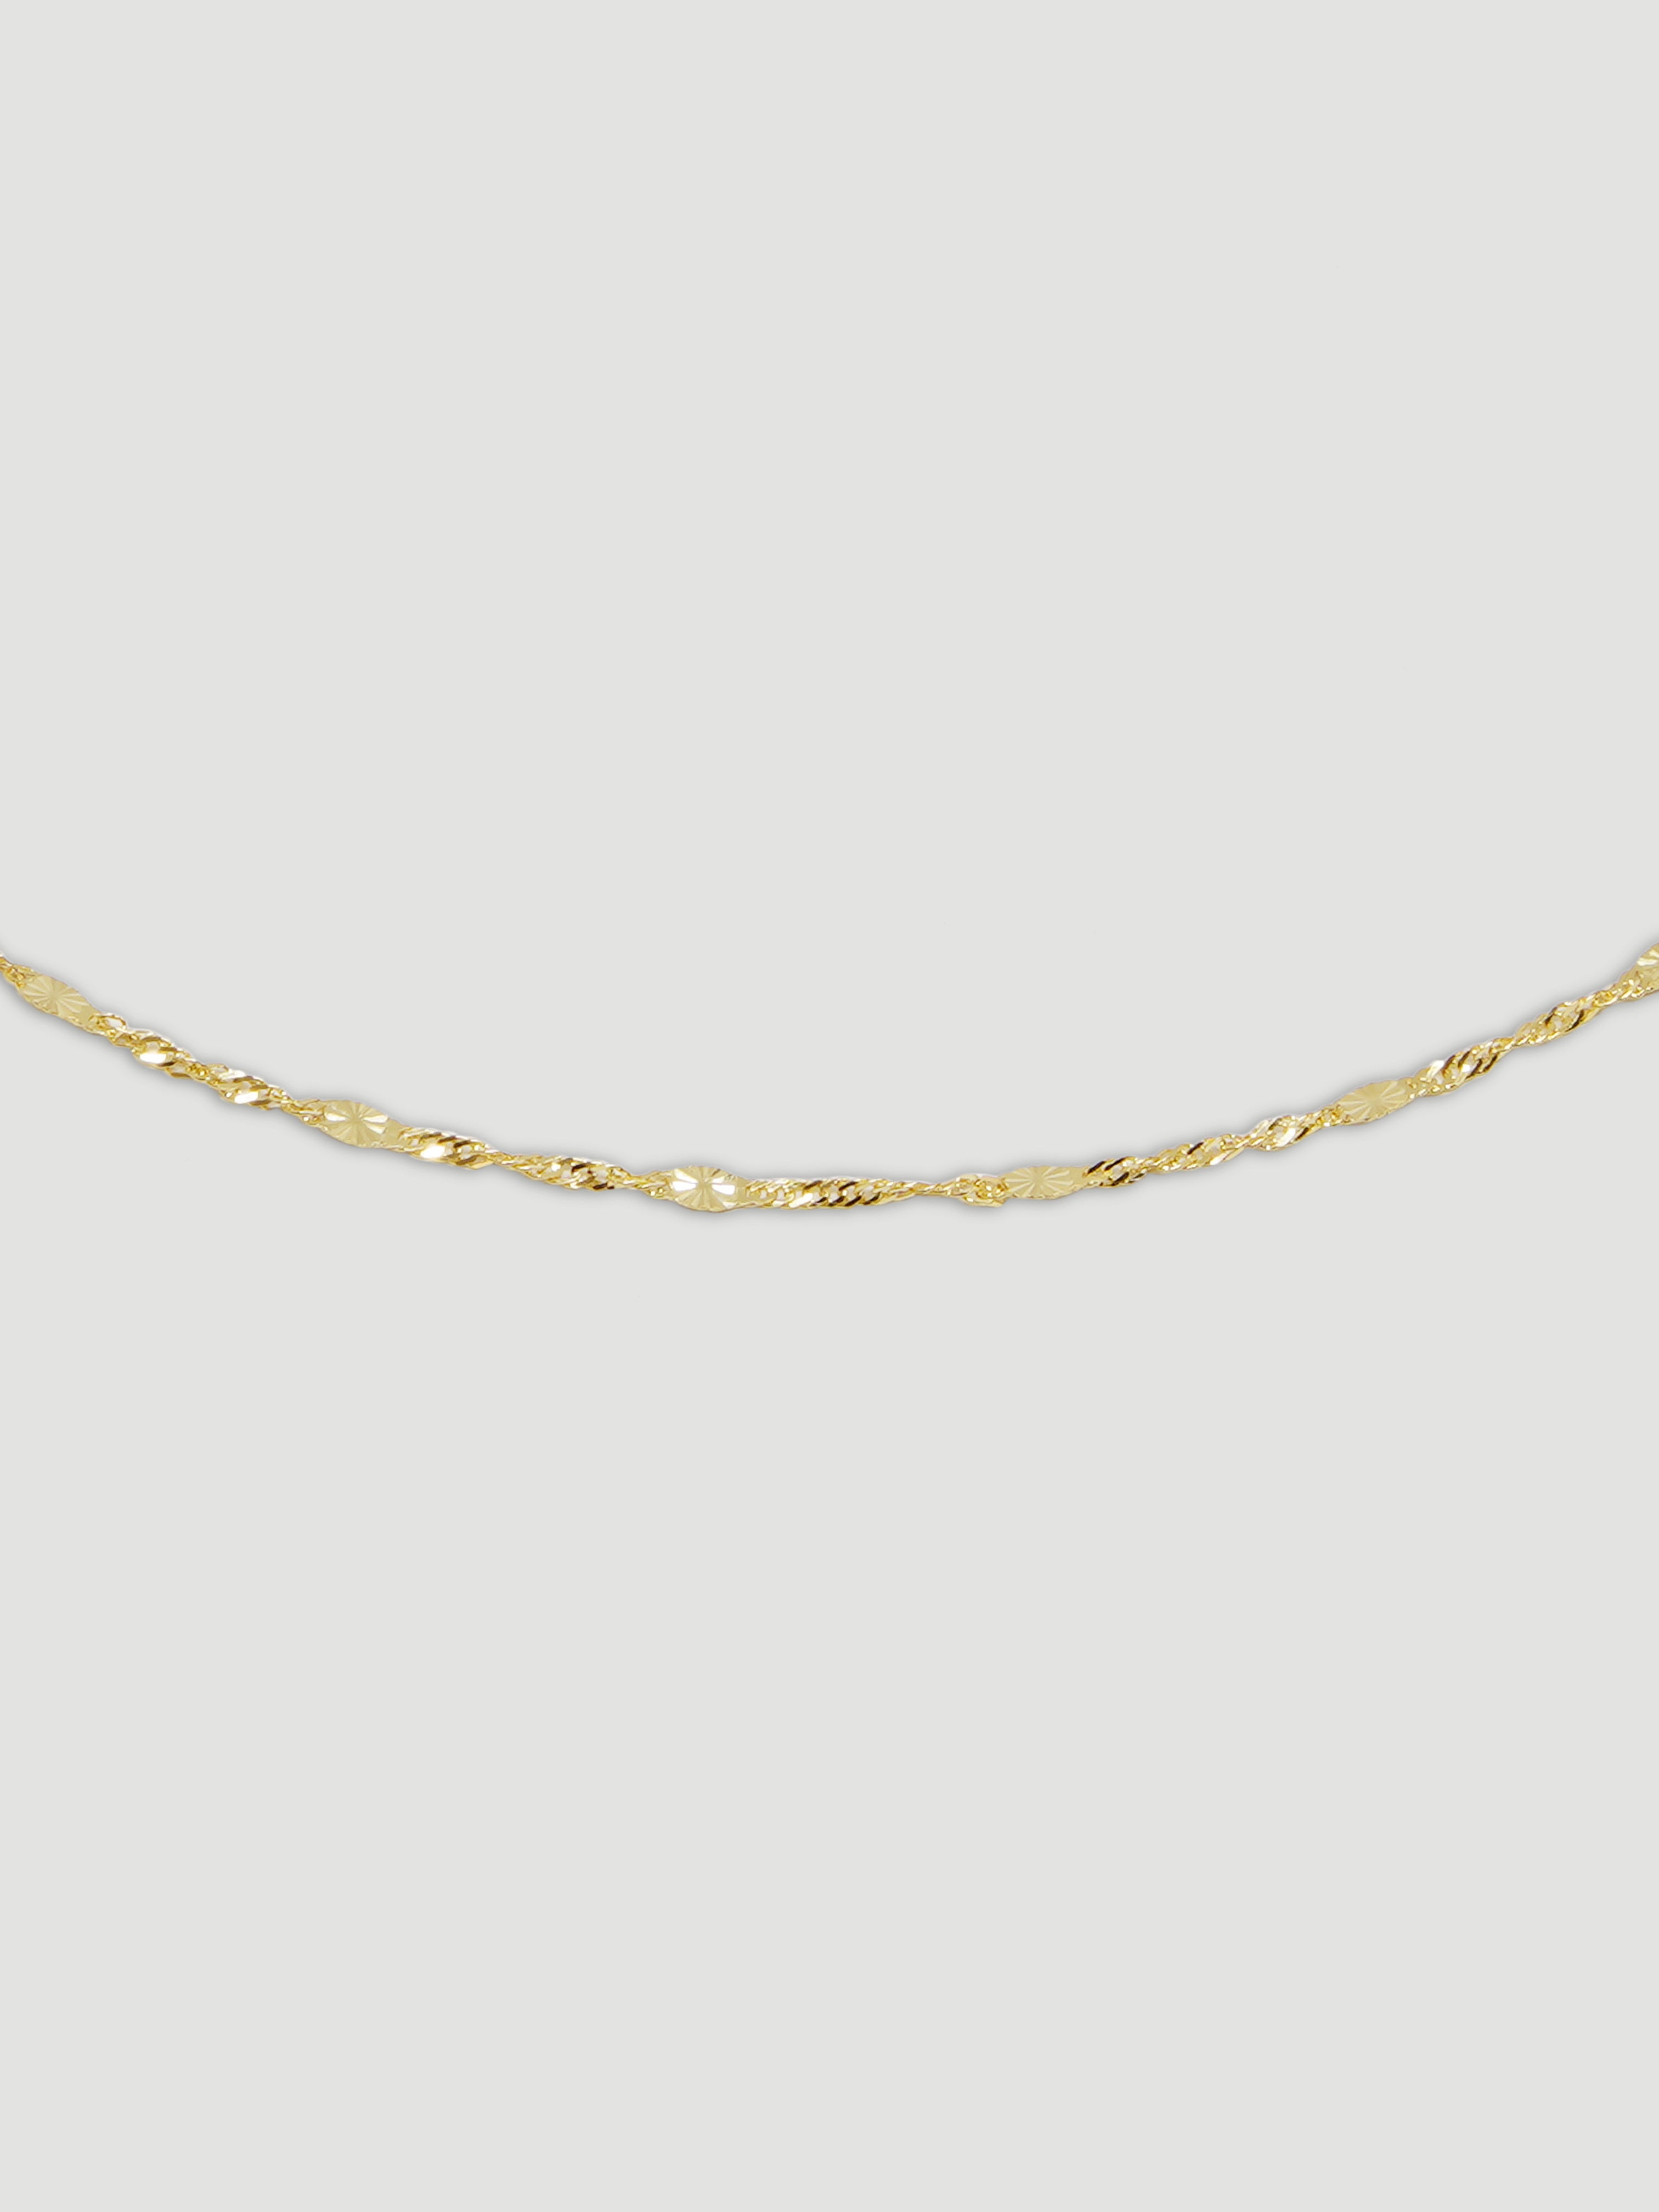 2.75mm 14K Yellow Gold Hollow Singapore Chain Necklace - The Black Bow  Jewelry Company